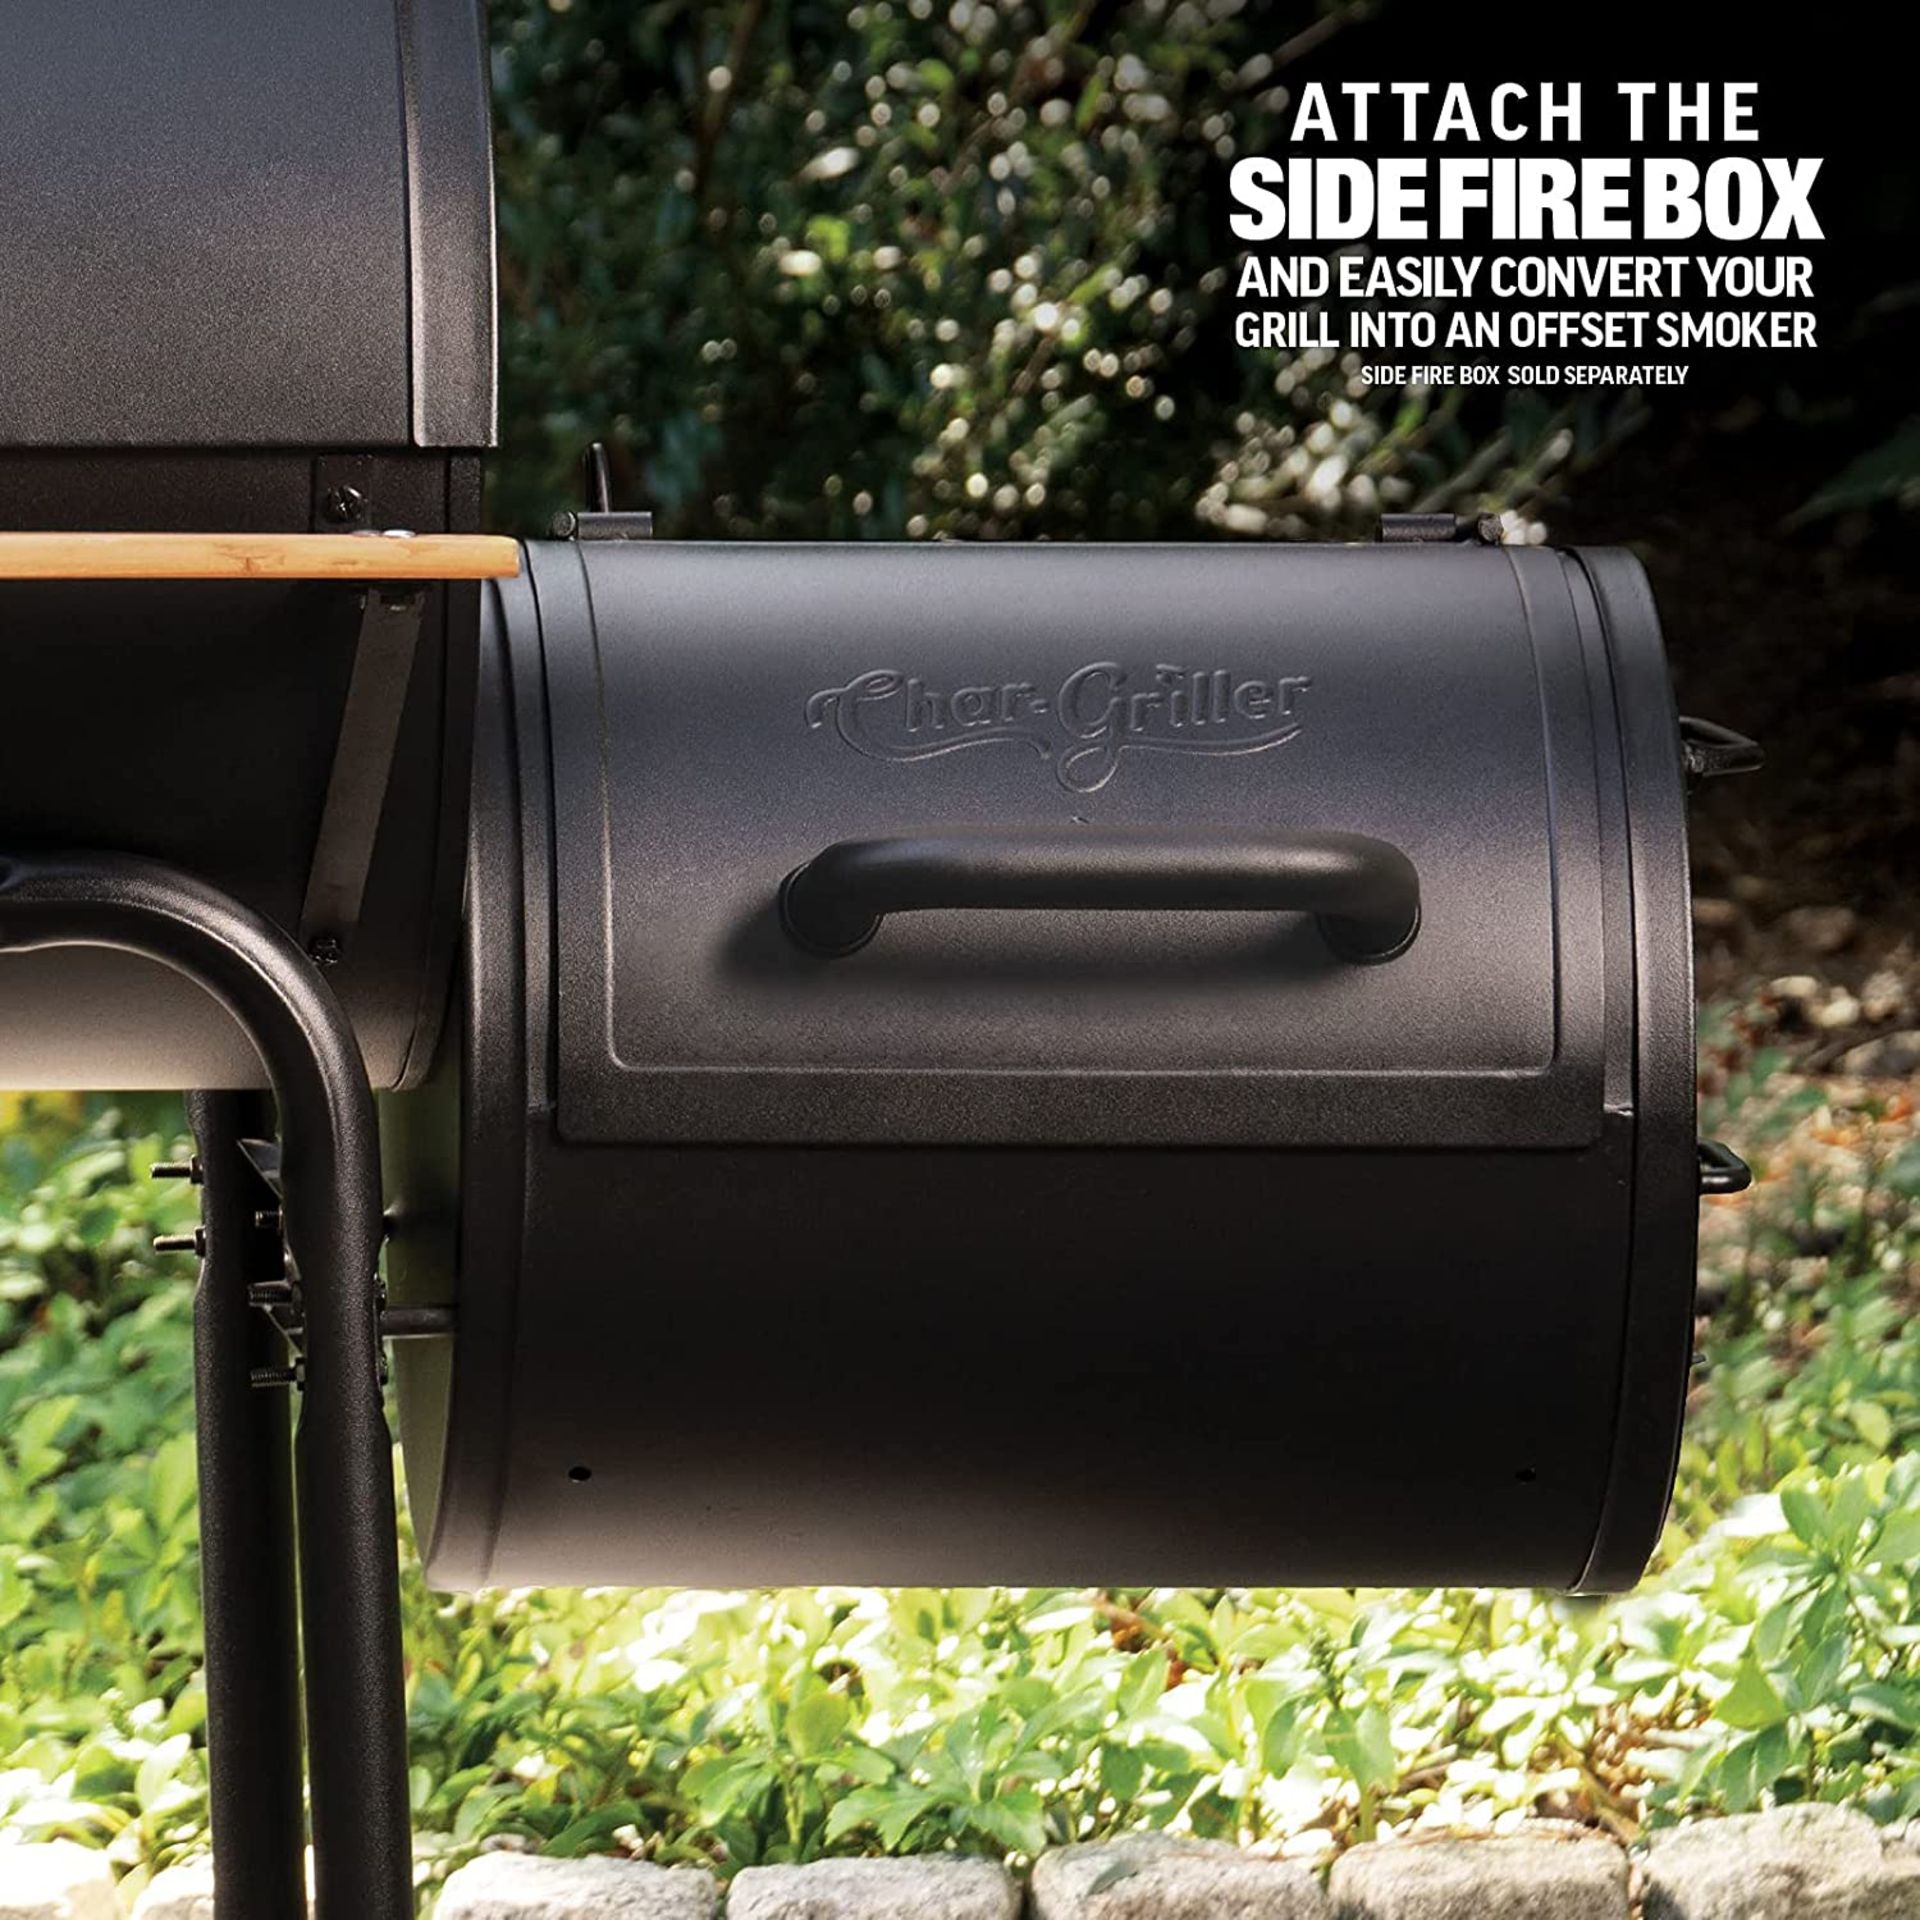 BRAND NEW CHAR GRILLER 2137 OUTLAW 1038 SQUARE INCH CHARCOAL GRILL/SMOKER - Image 9 of 12